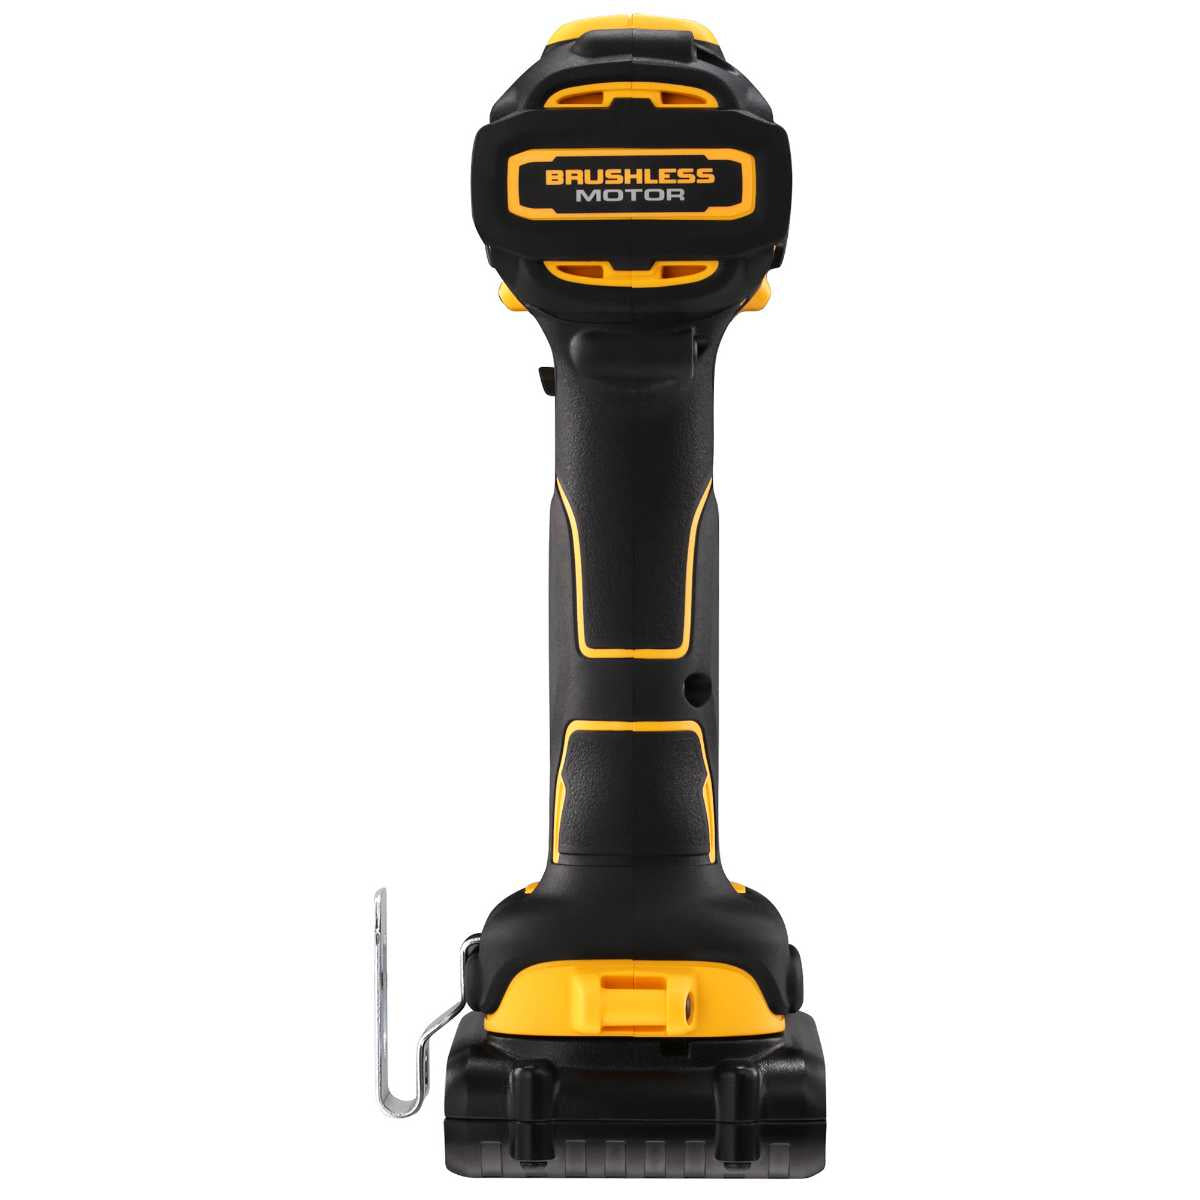 DEWALT 18V Ultra Compact Brushless Drill Driver DCD708S2T Power Tool Services